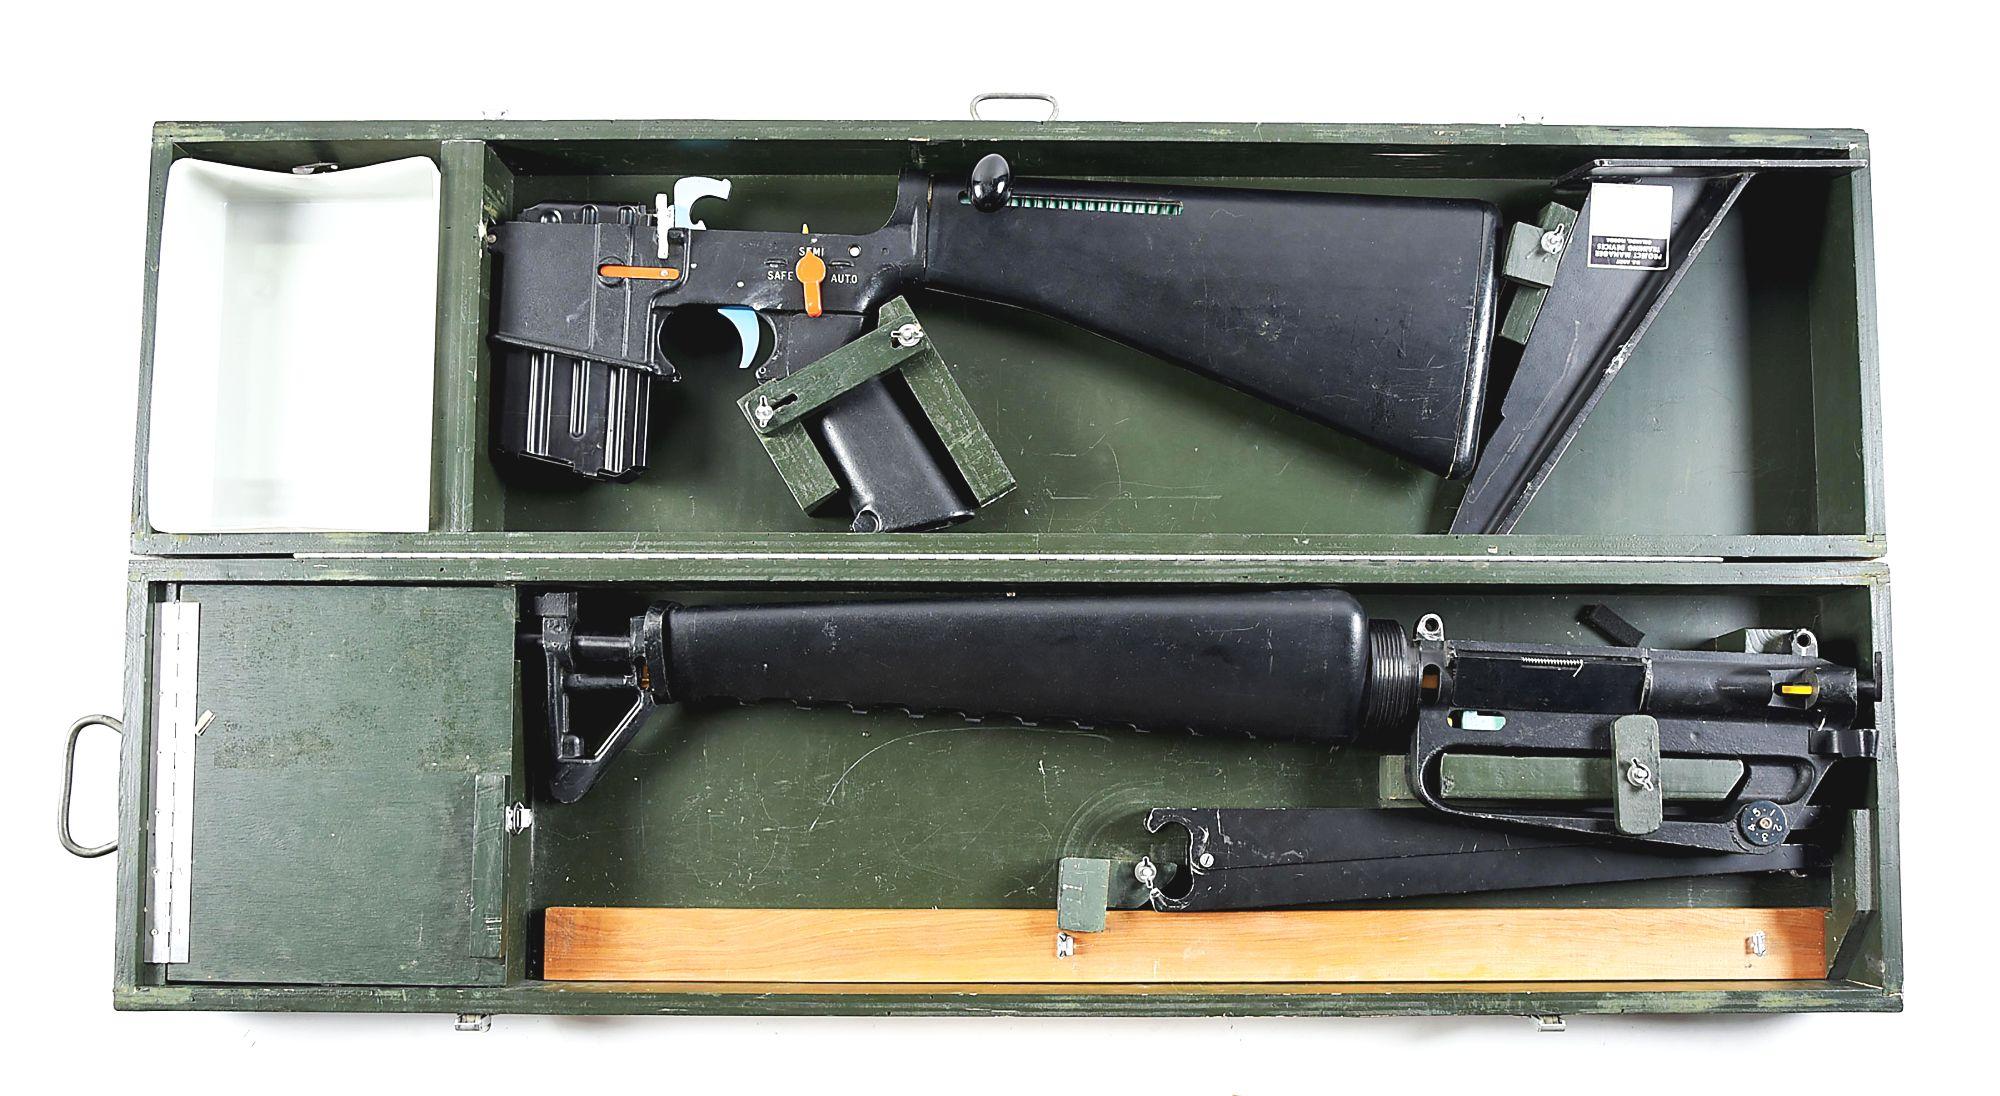 EXTREMELY RARE OVERSIZED CUTAWAY M16 CLASSROOM DEMONSTRATOR WITH ORIGINAL CASE AND ACCESSORIES.